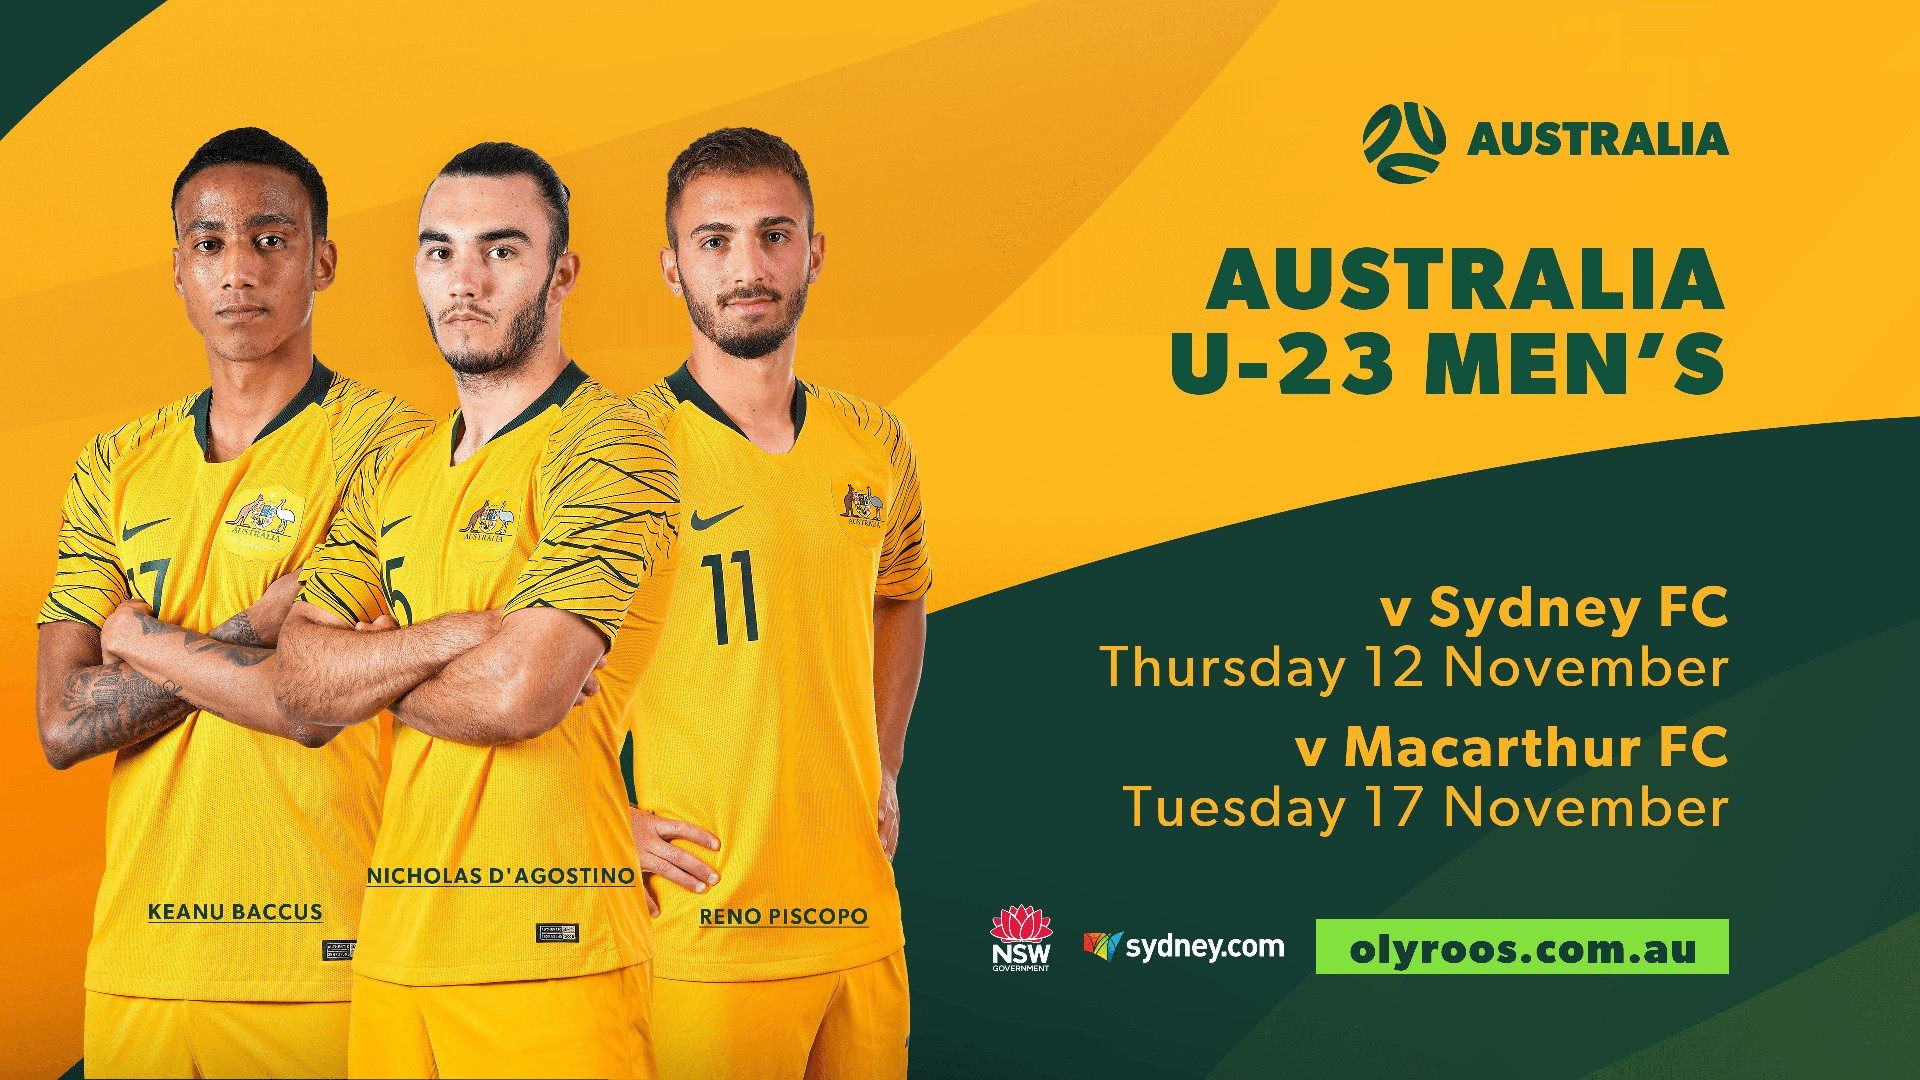 Olyroos players hope to impress at training camp to earn Tokyo 2020 place